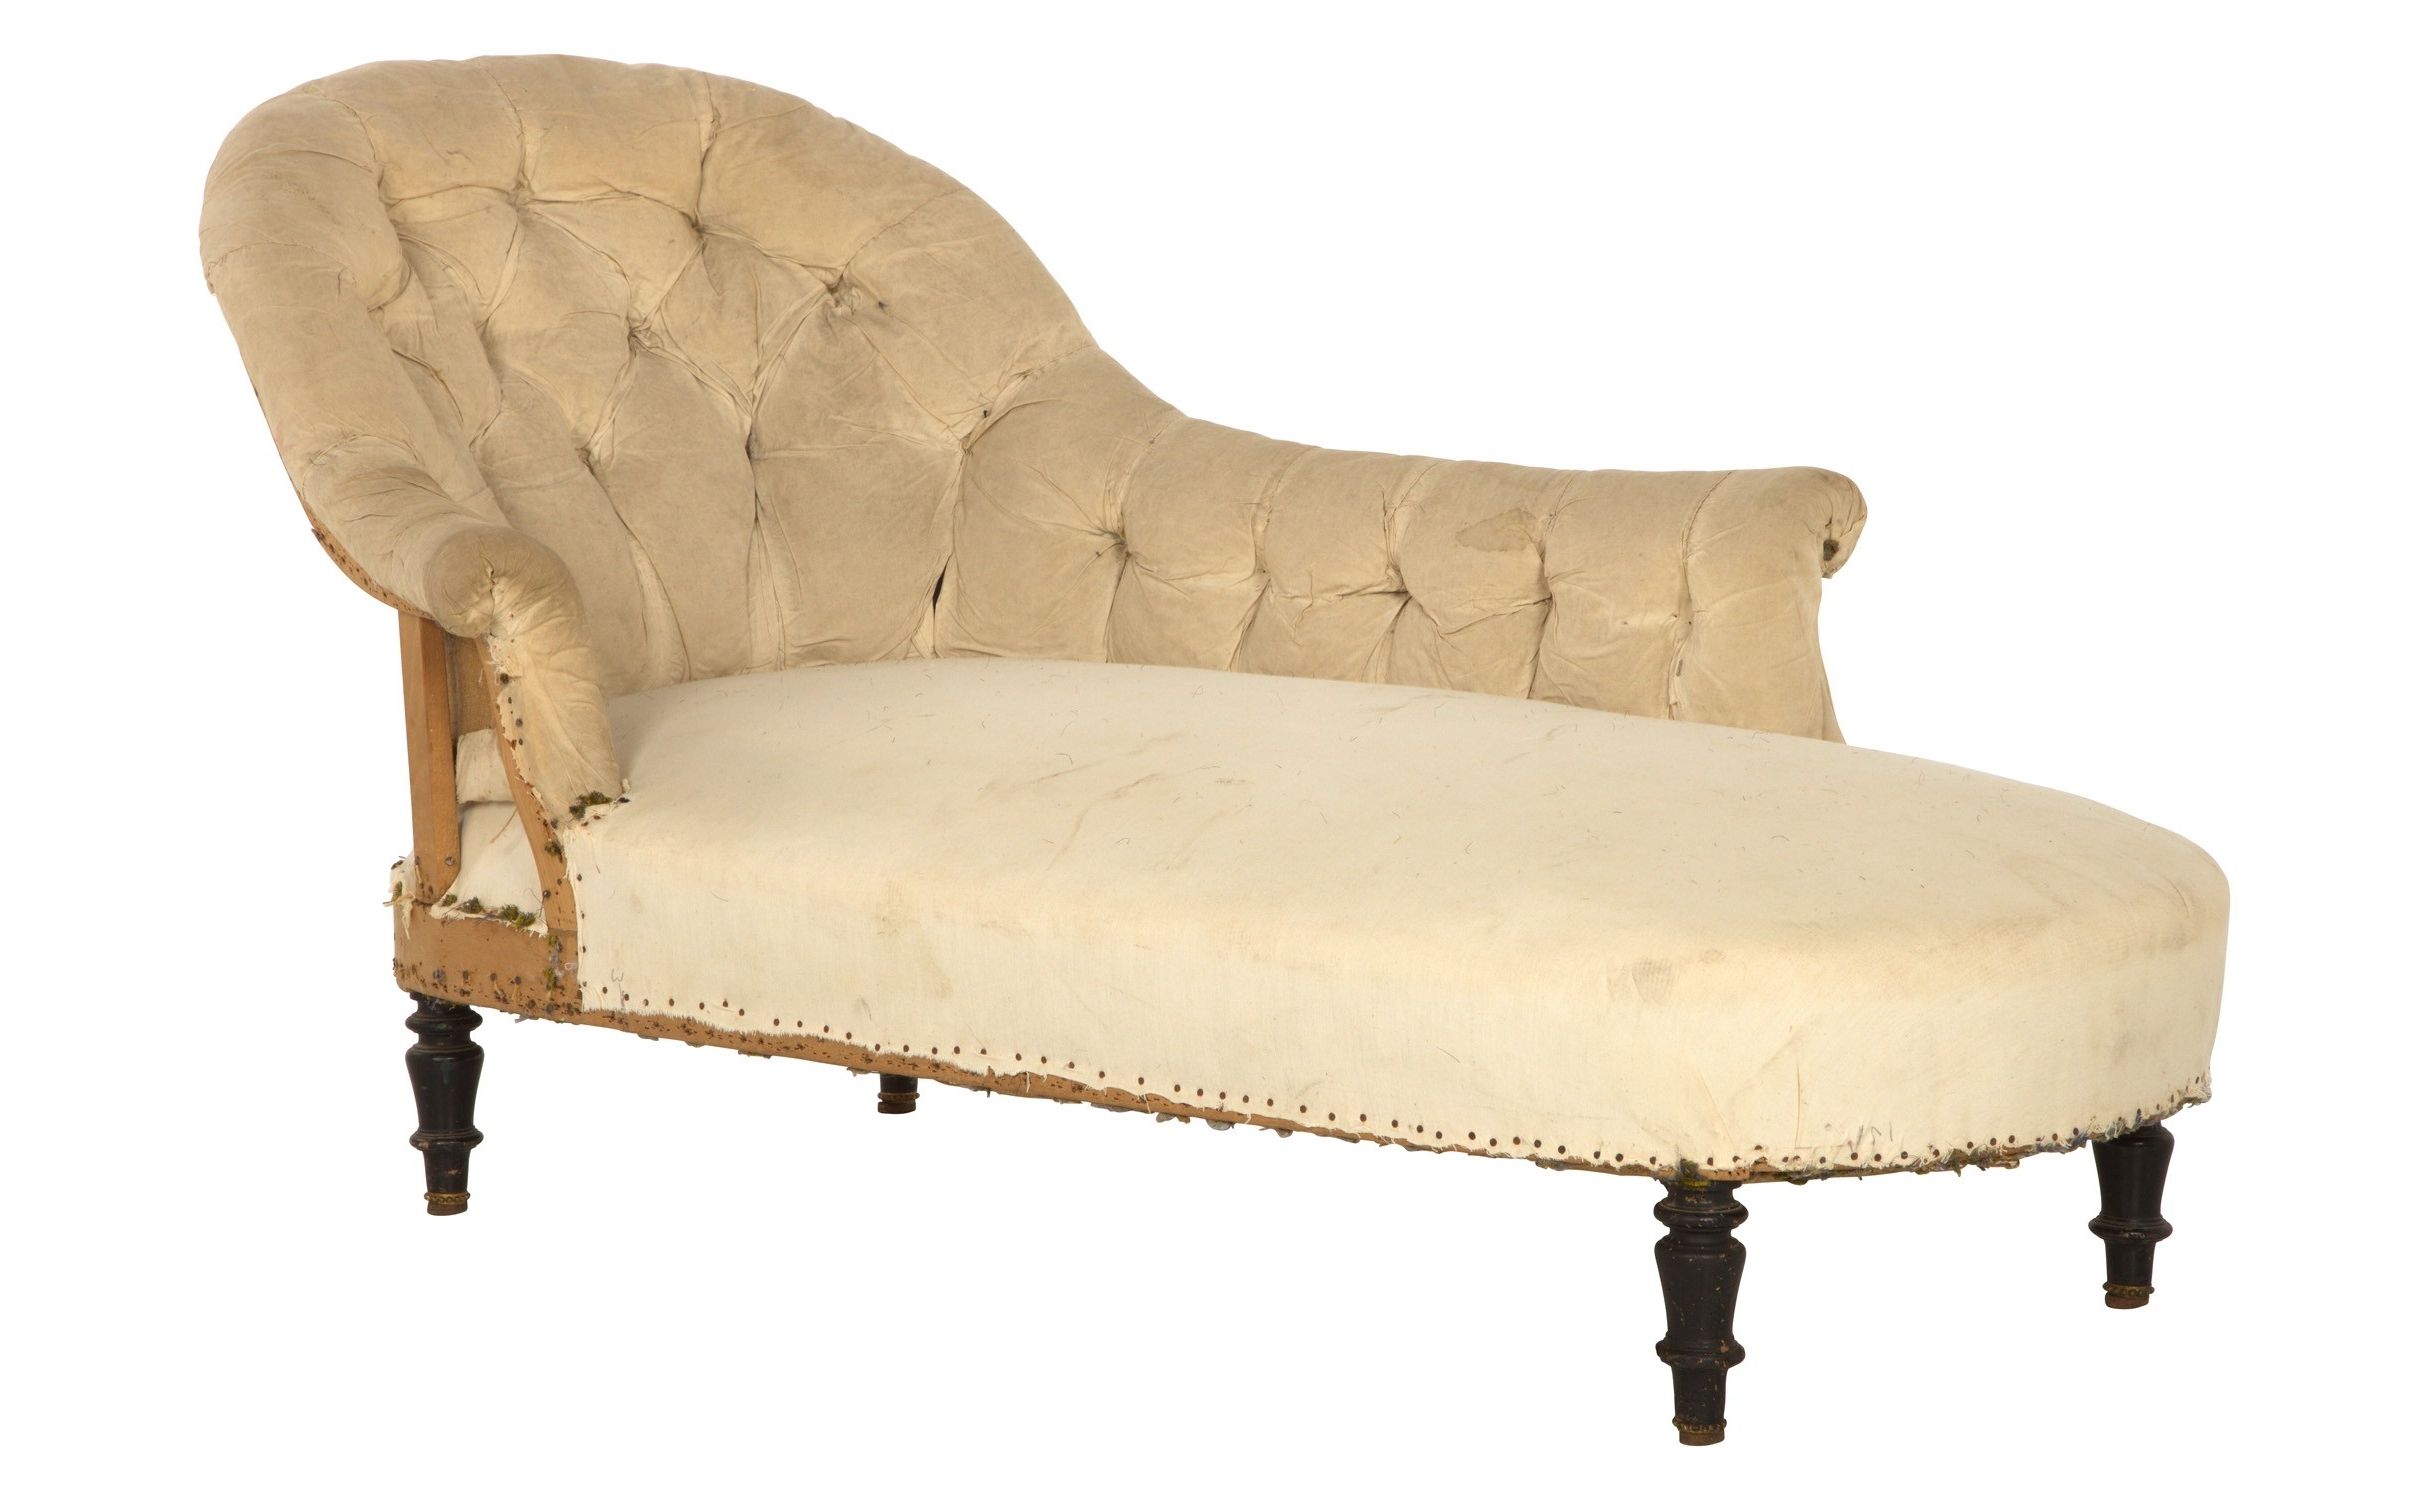 Jayson Home For Fashionable Vintage Chaise Lounges (View 1 of 15)